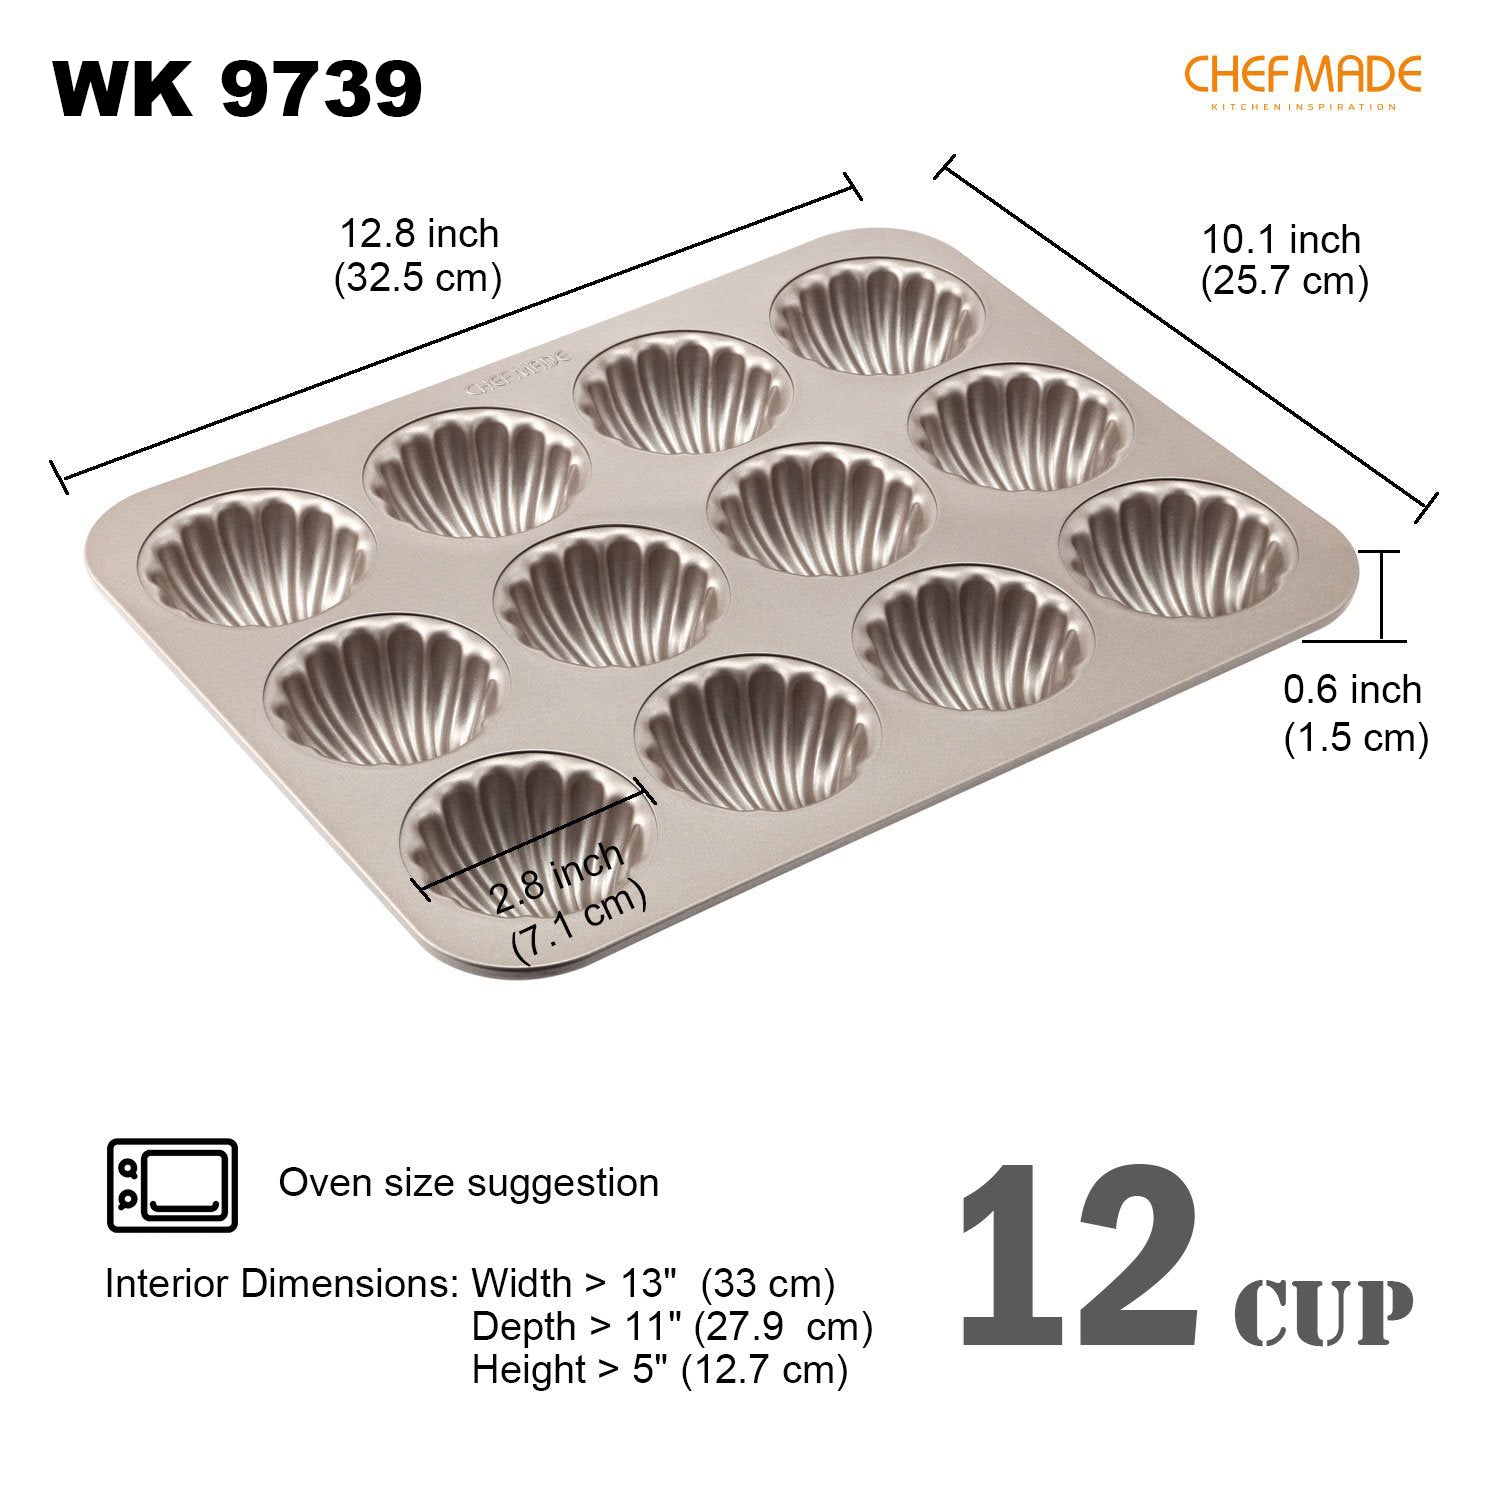 CHEFMADE 12 Cup Non-Stick Shell Madeleine Cake Pan (WK9739)